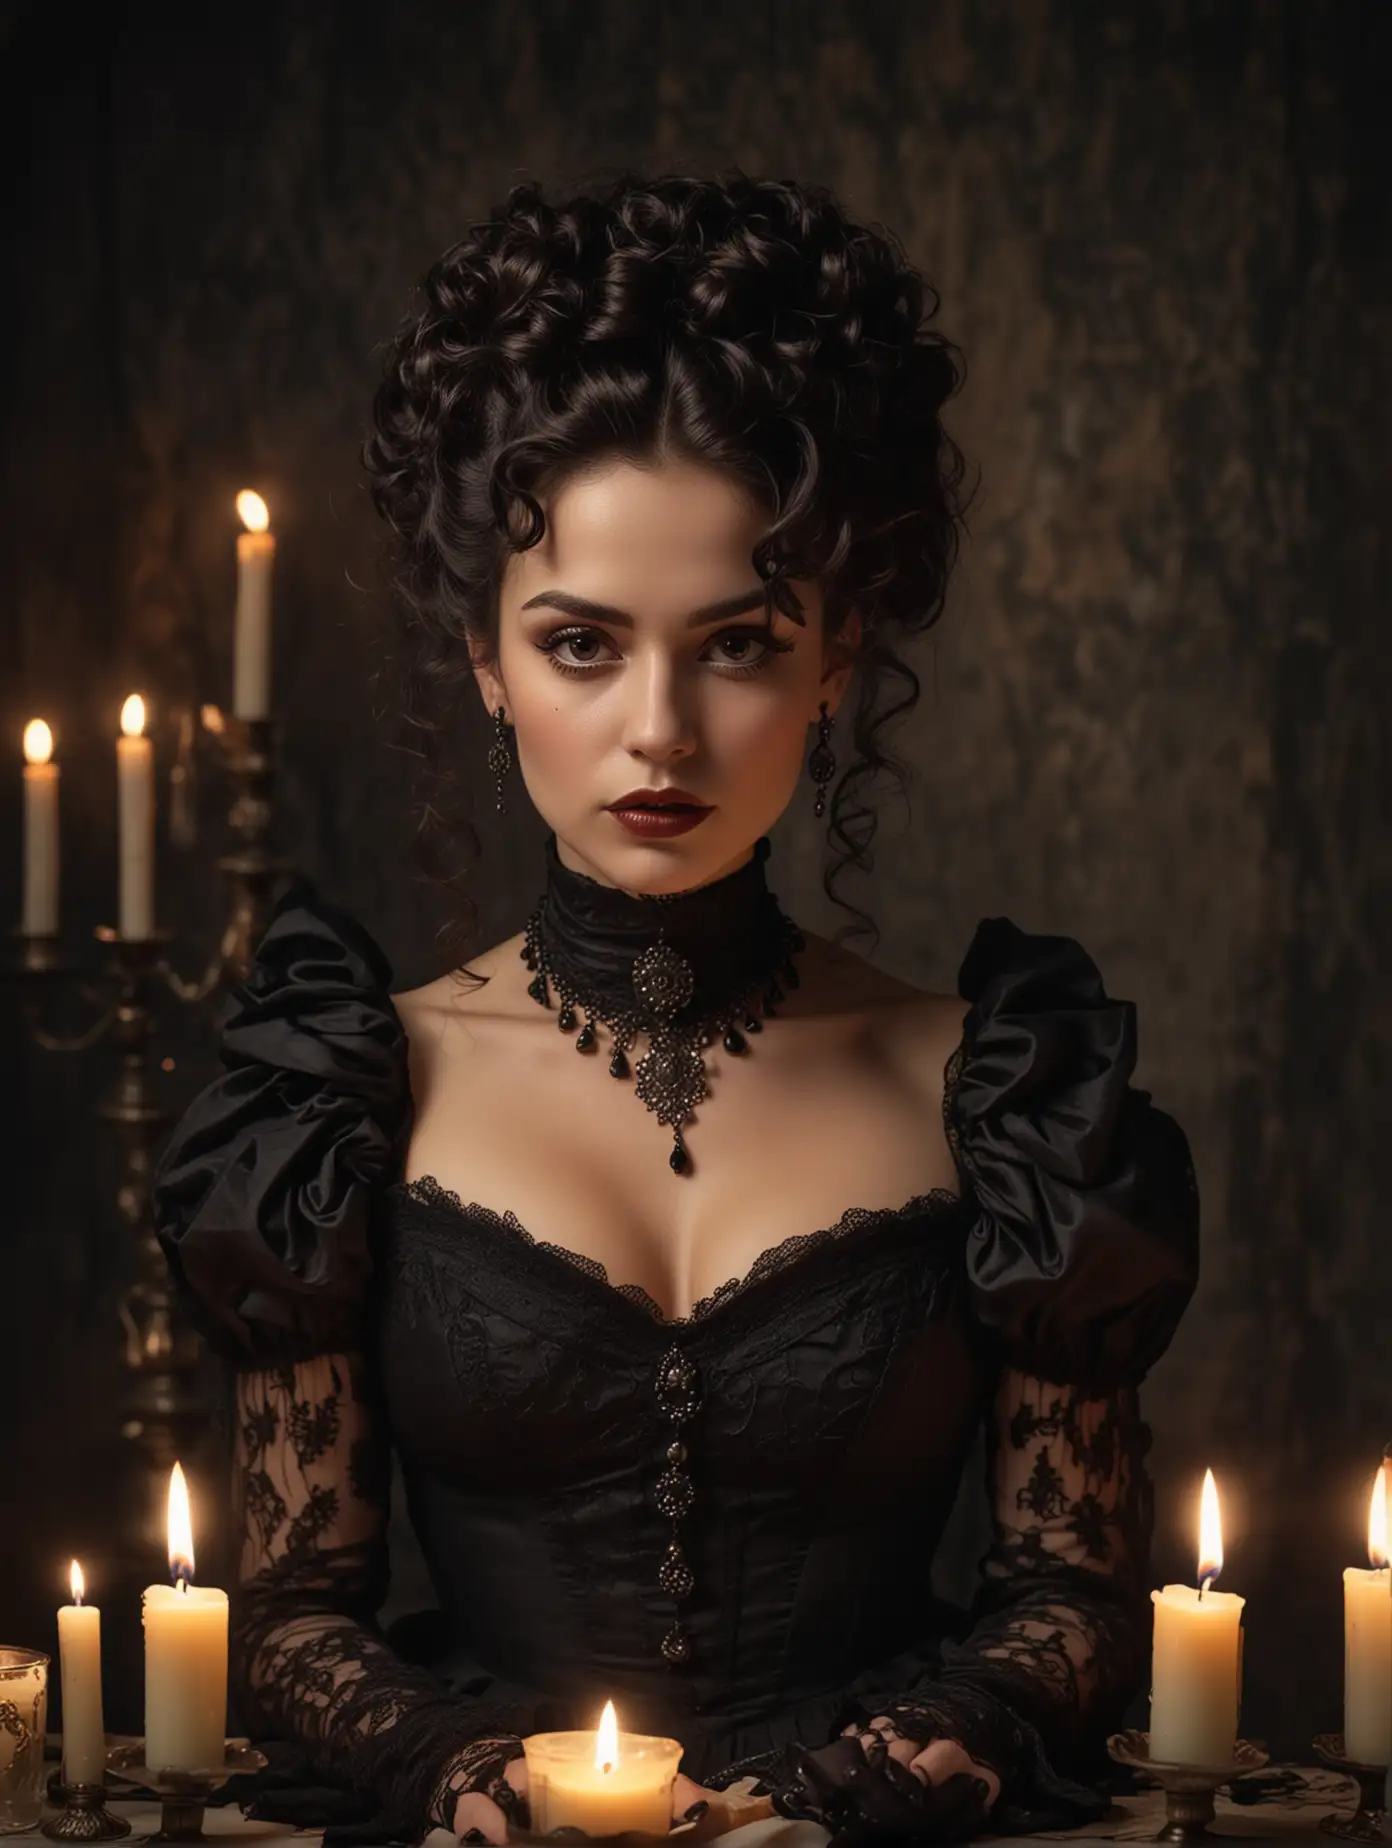 Beautiful Victorian era woman portrait, small nose, full lips, dark curly hair in voluminous updo, dark jewelry, lit candles surrounding her, vintage goth vibe,